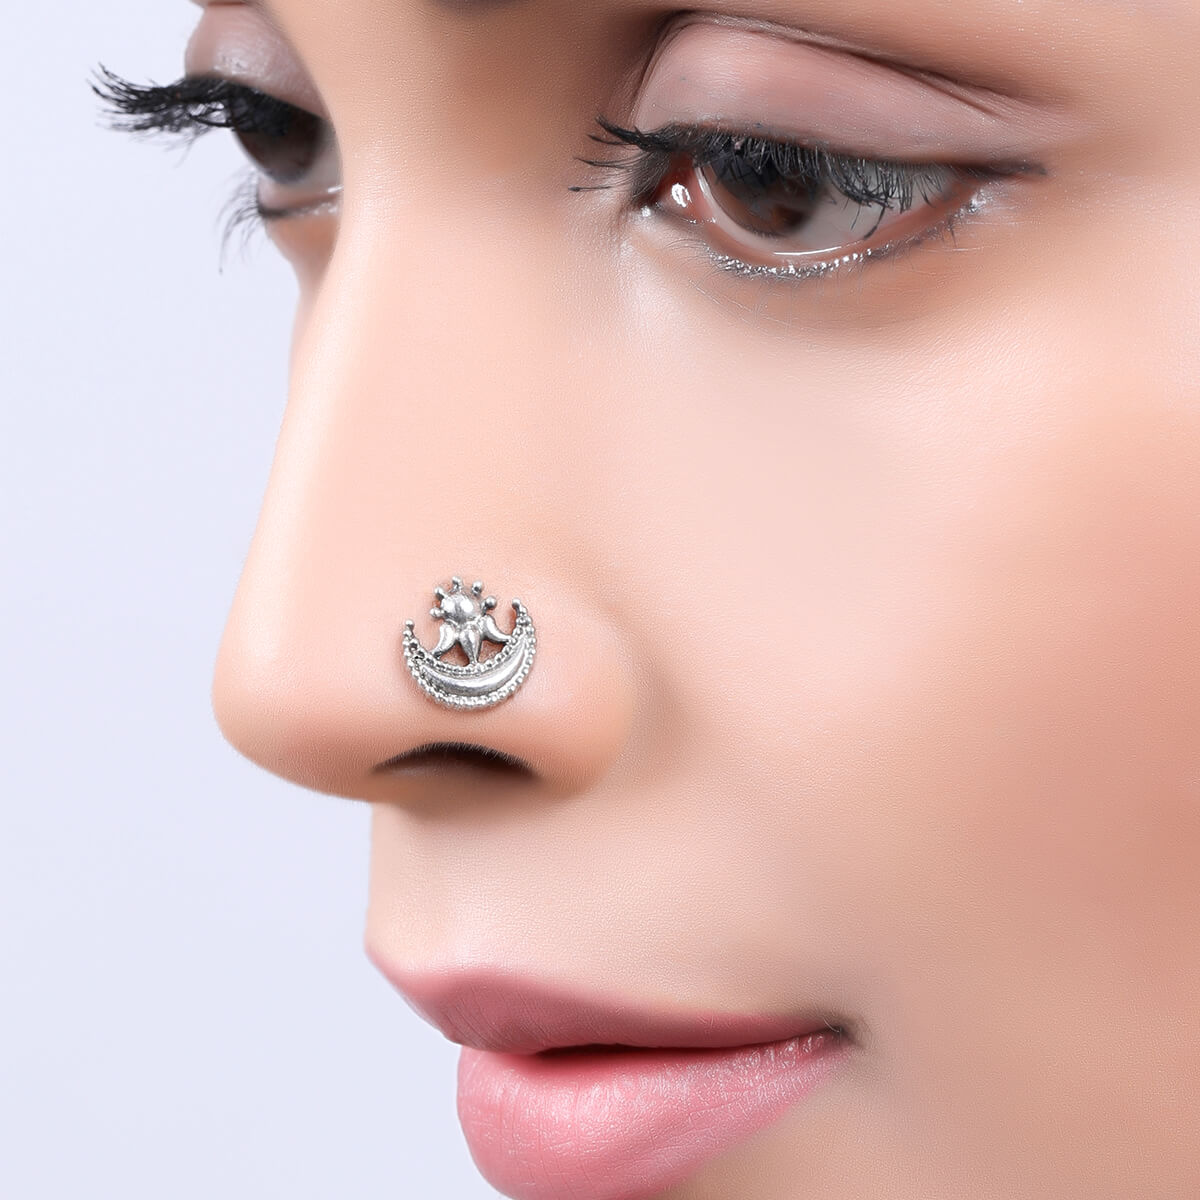 Chand Silver Nosepin, Piercing